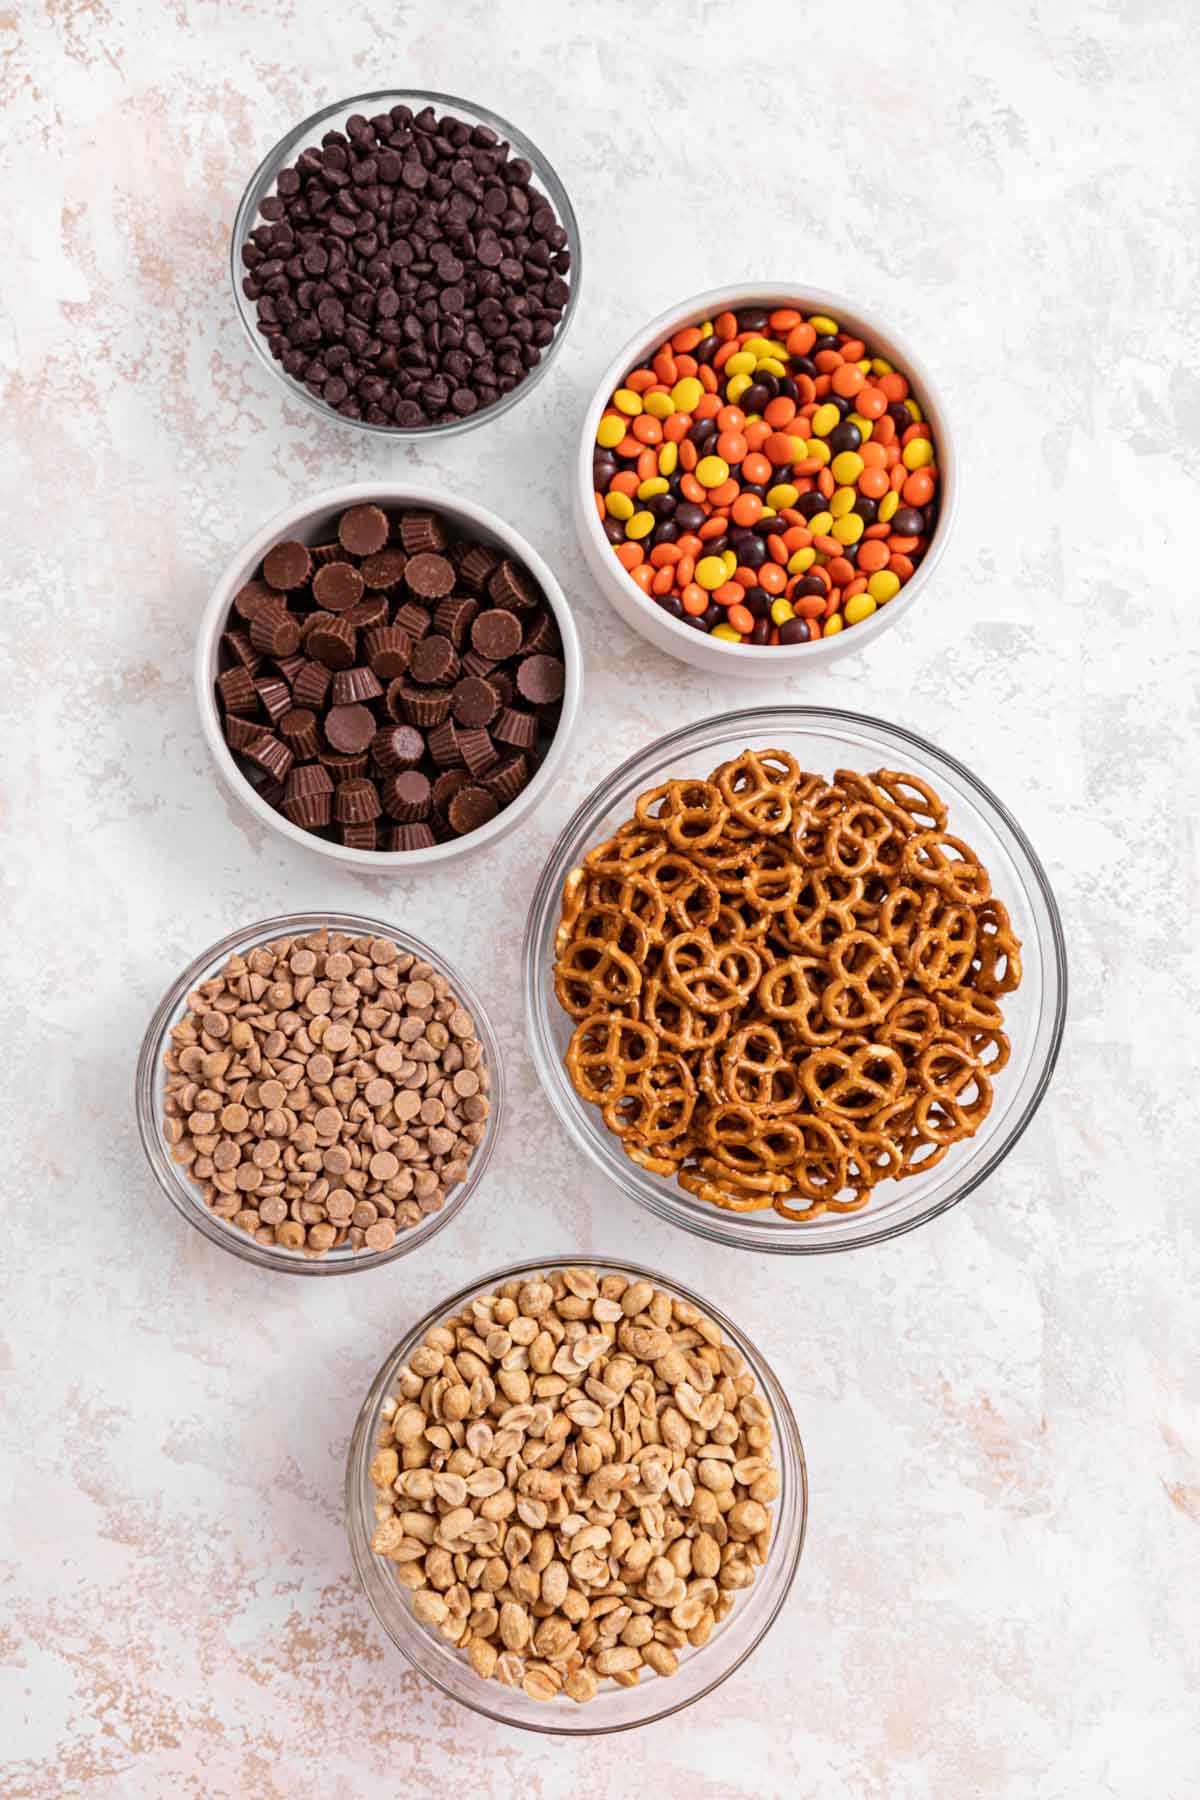 Chocolate Peanut Butter Trail Mix ingredients in separate bowls